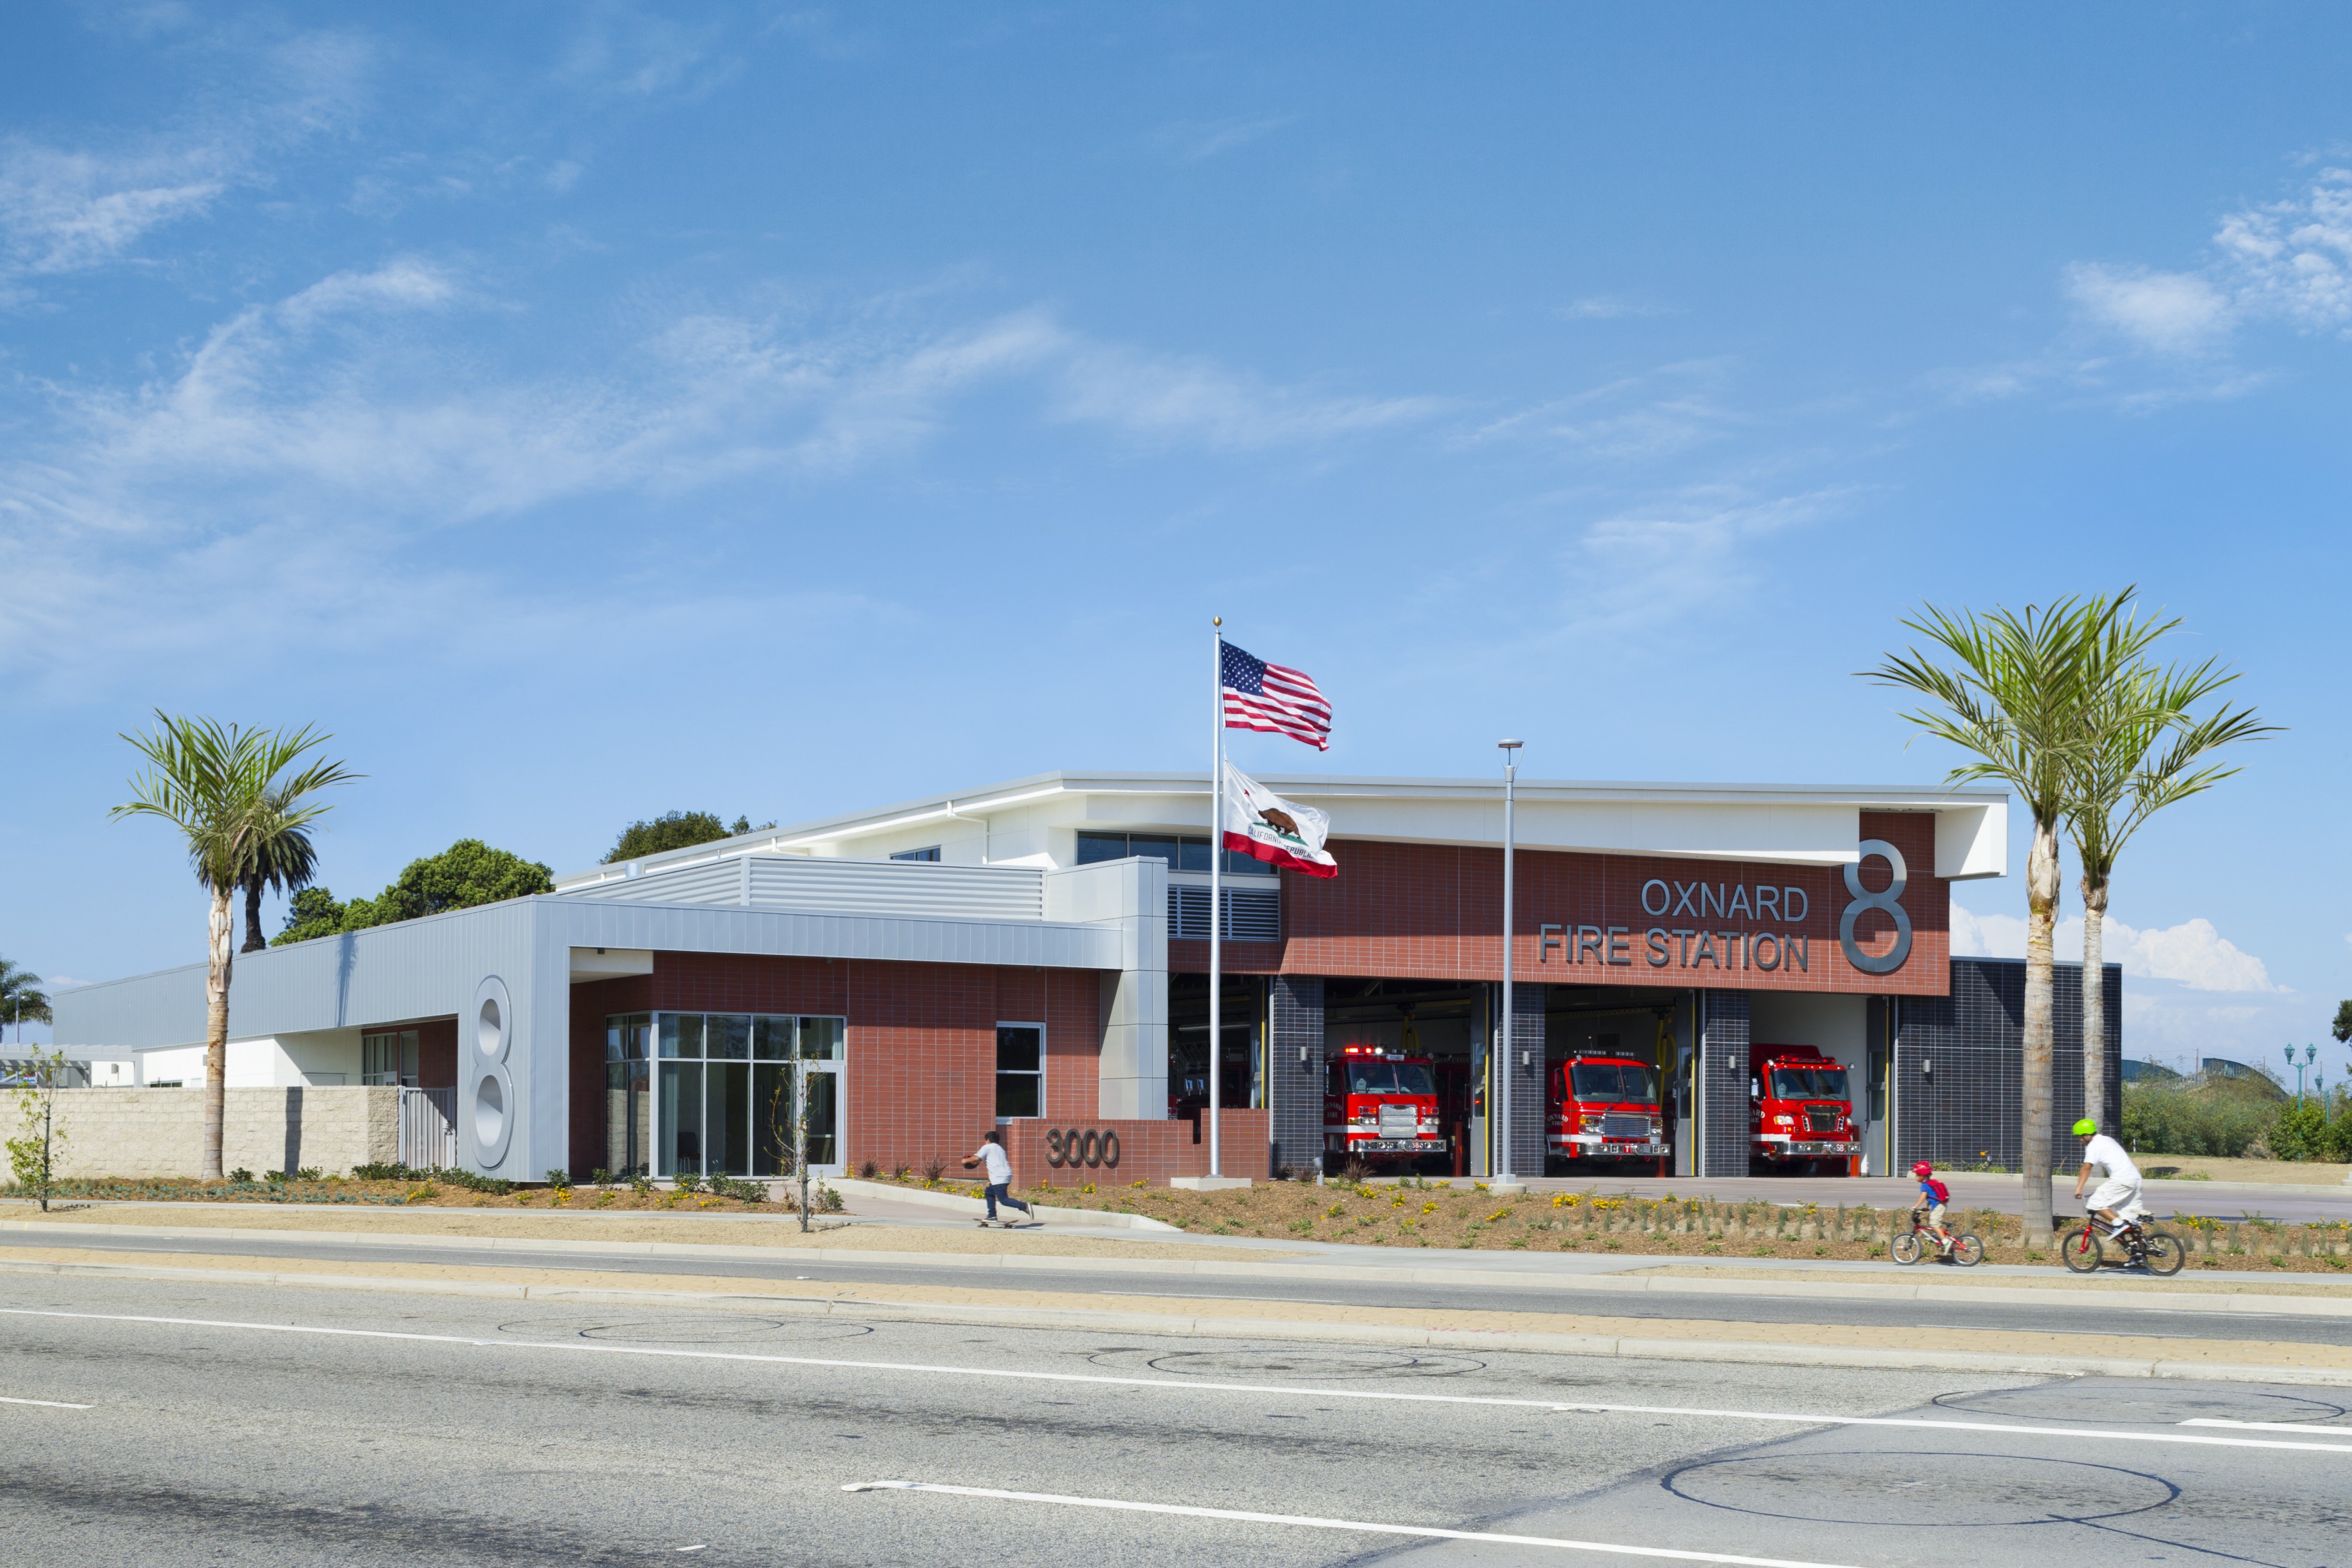 A design-build architecture approach proved successful at Oxnard Fire Station No. 8.